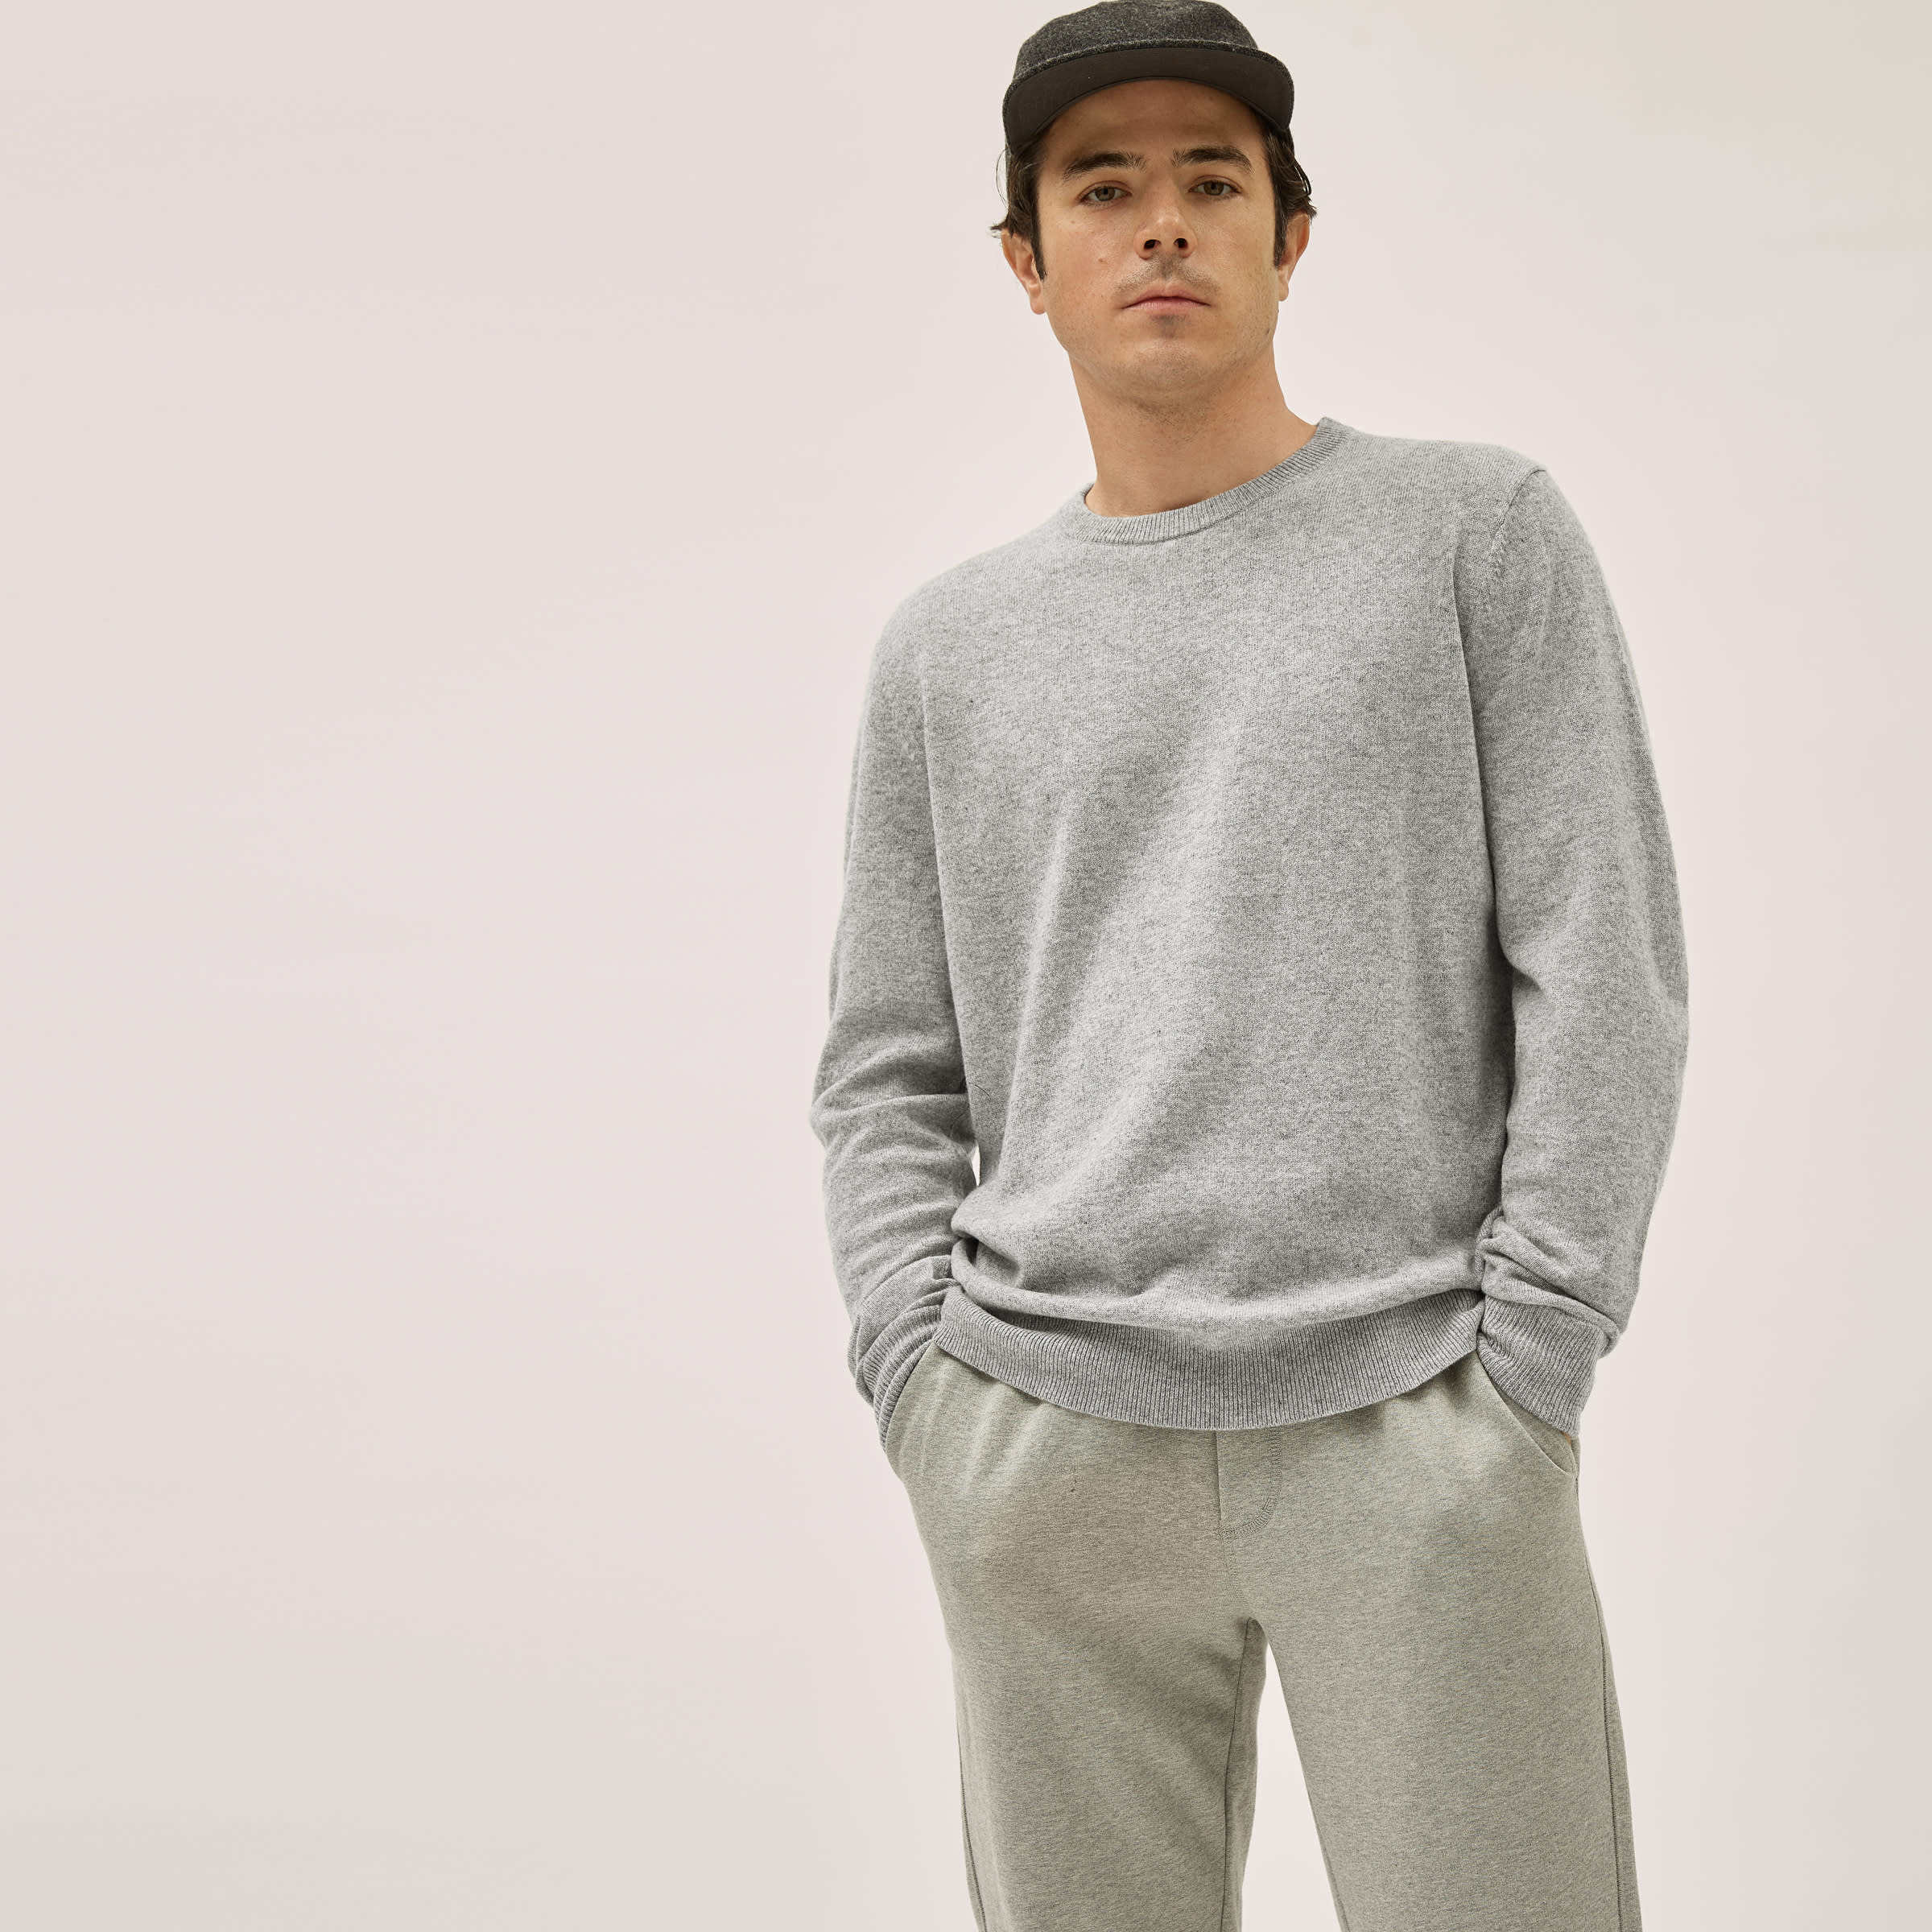 Everlane Men's Grade-a Cashmere Crew Neck Sweater in Heathered Grey, Size Extra Small